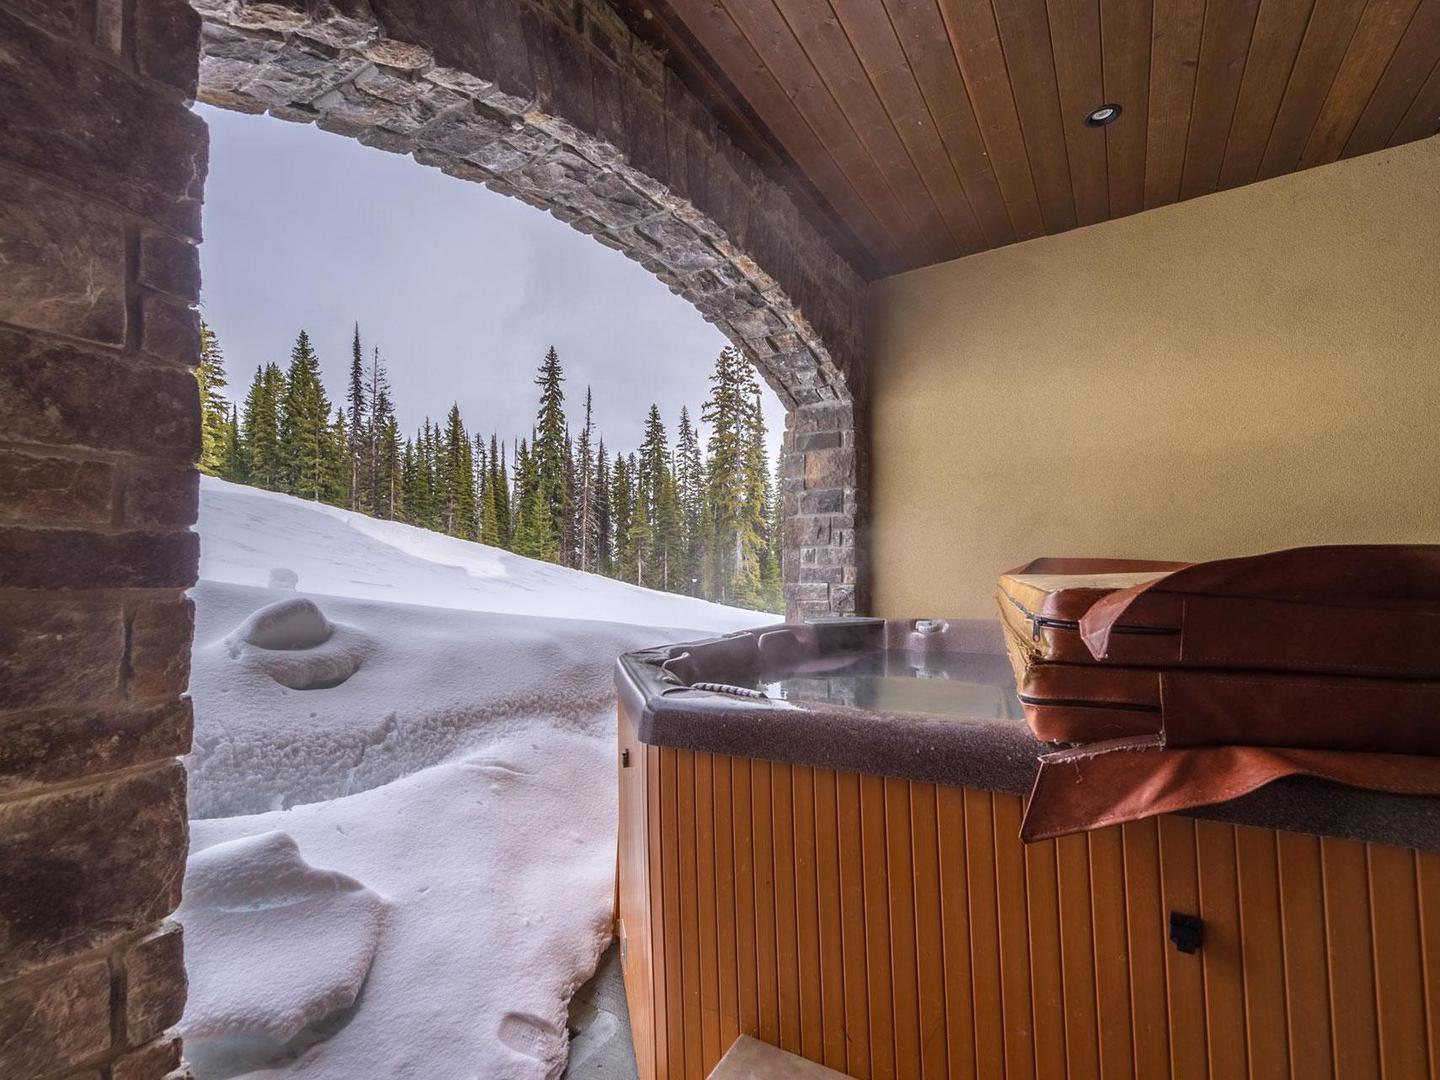 The private deck and hot tub with stone accents and snow nearby at luxury vacation rental South Point #15 at Big White Ski Resort.